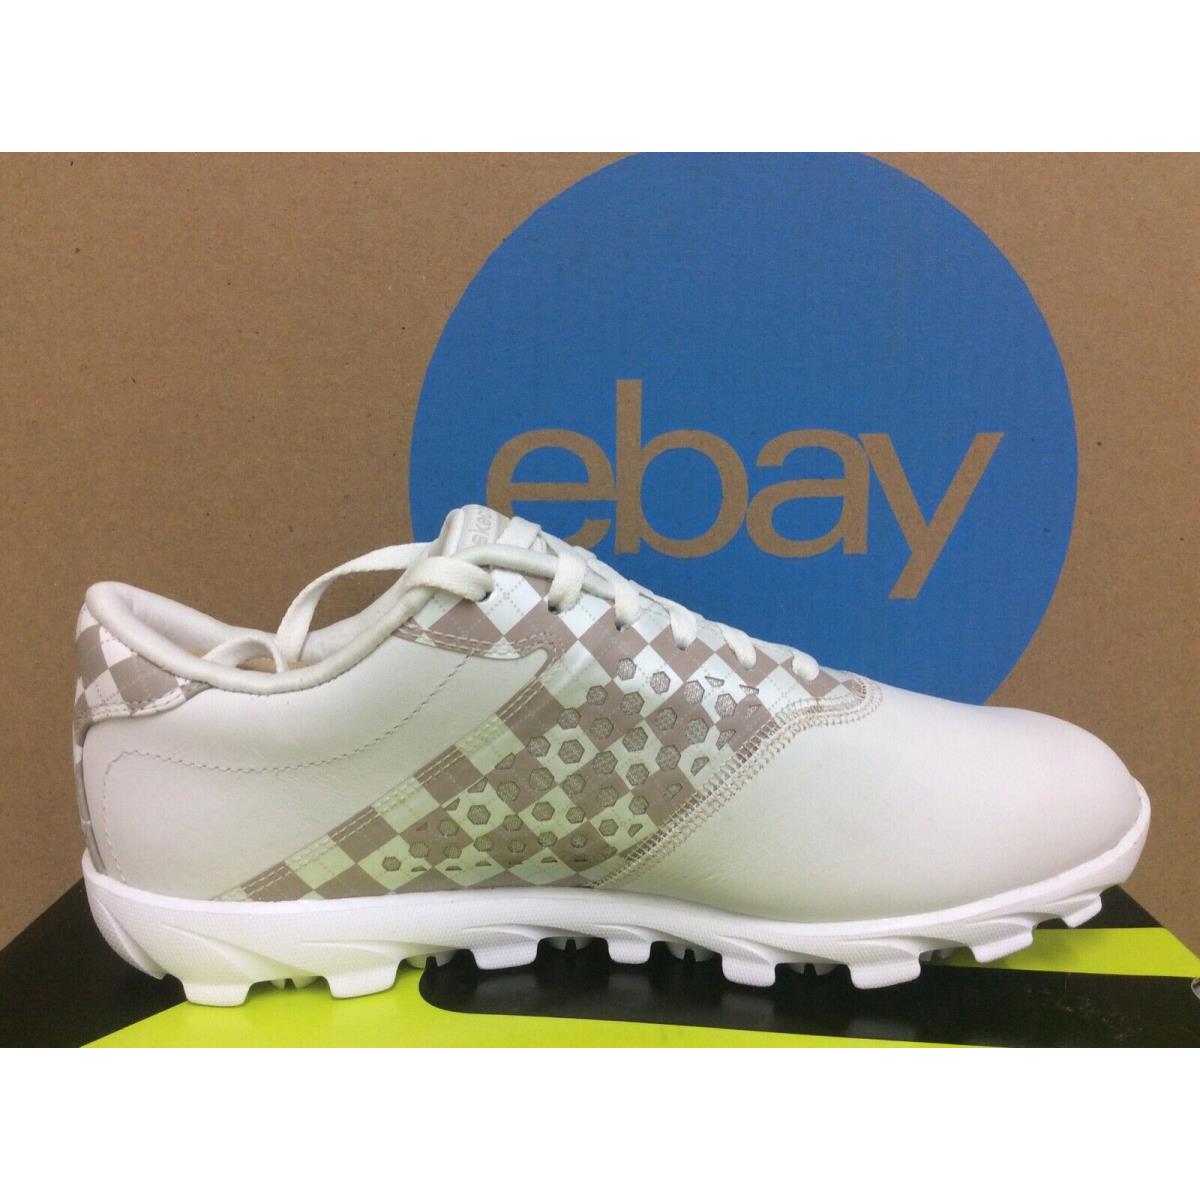 Skechers shoes Golf - White Natural 7